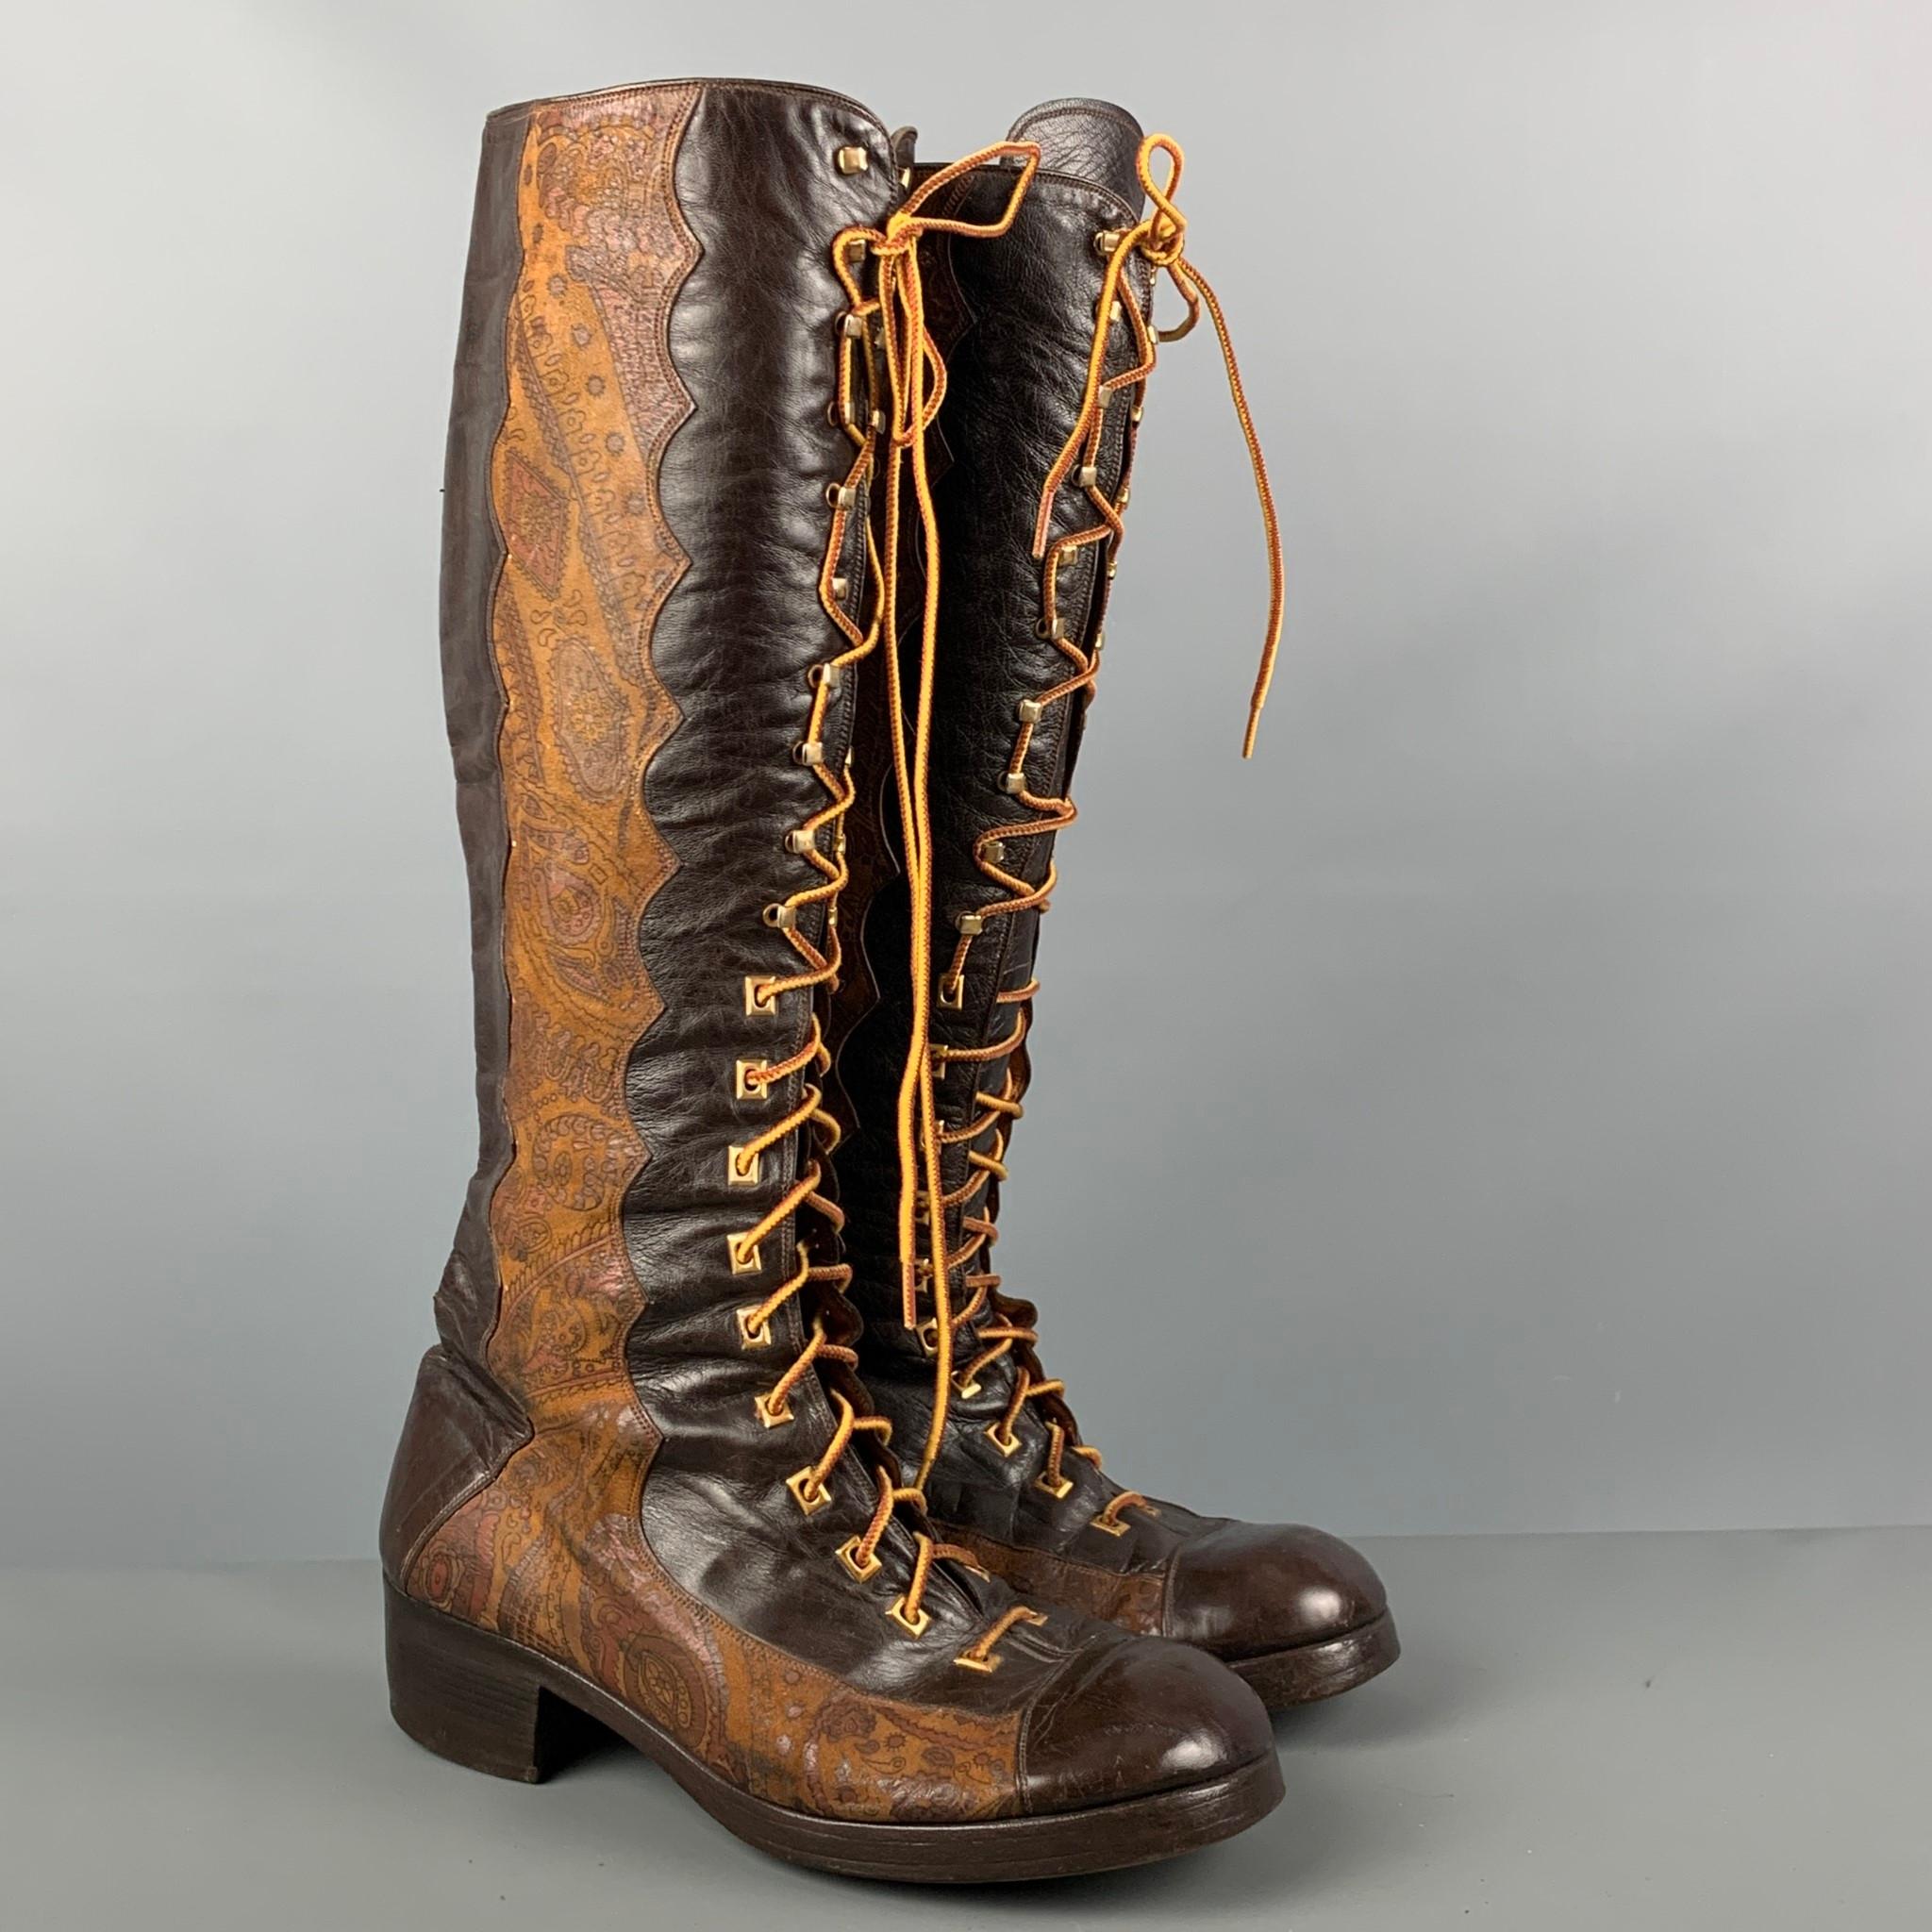 VINTAGE knee high boots comes in a brown and tan leather featuring a round toe, paisley print, lace up closure, and metal gold hardware.

Good Pre-Owned Condition. Moderate signs of wear. As Is.
Marked: 3412 u 565 10

Measurements:

Length: 11.5